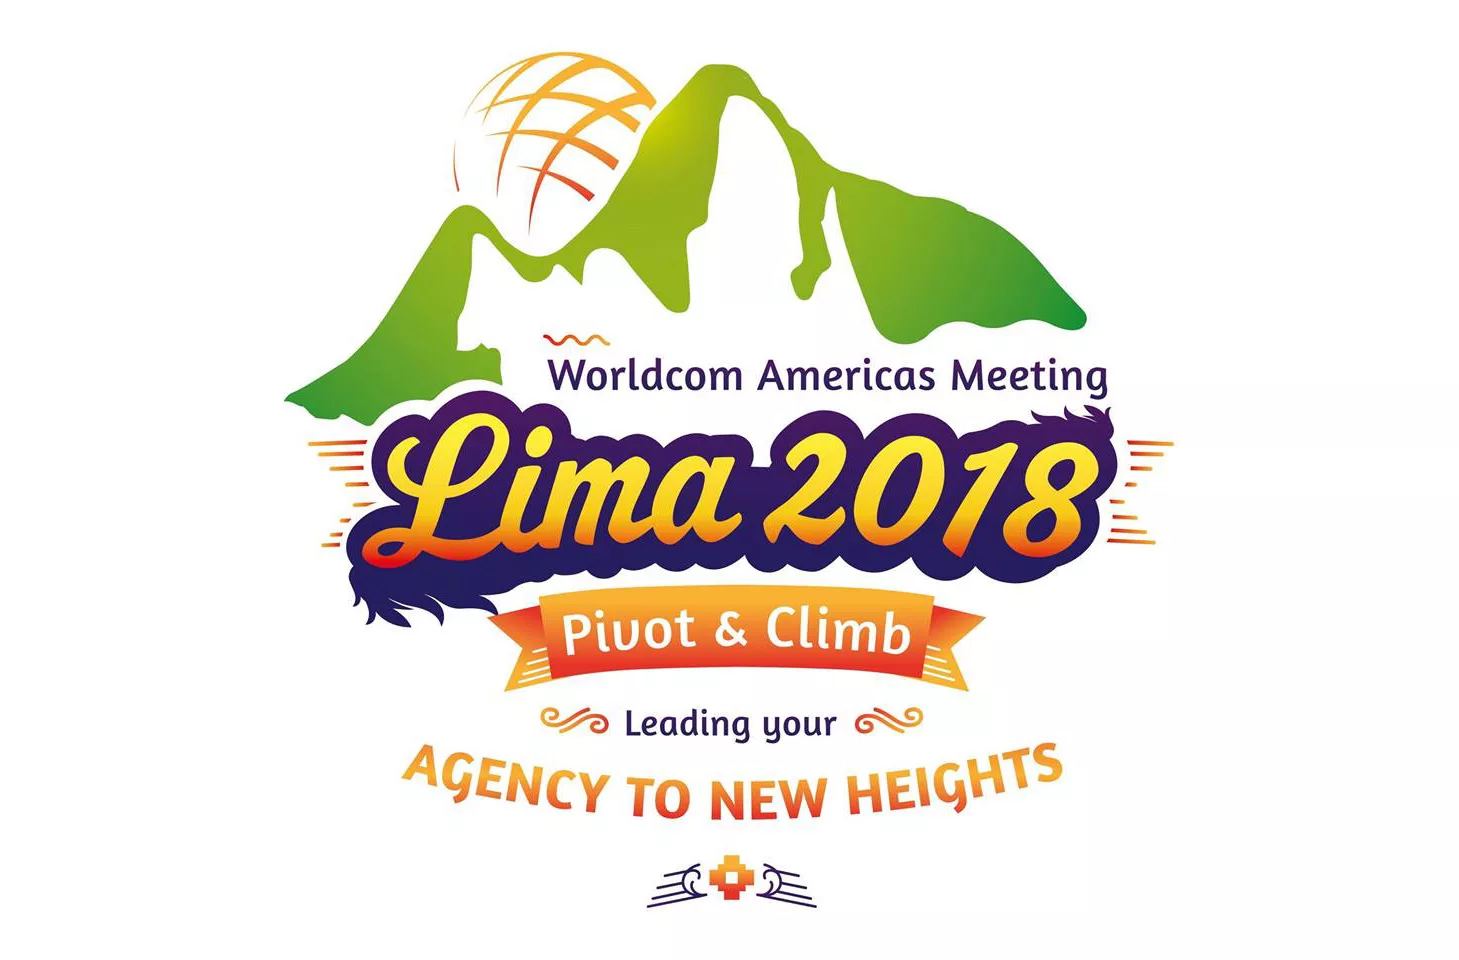 Logo for Worldcom Americas Meeting Lima 2018 with mountain and banner design